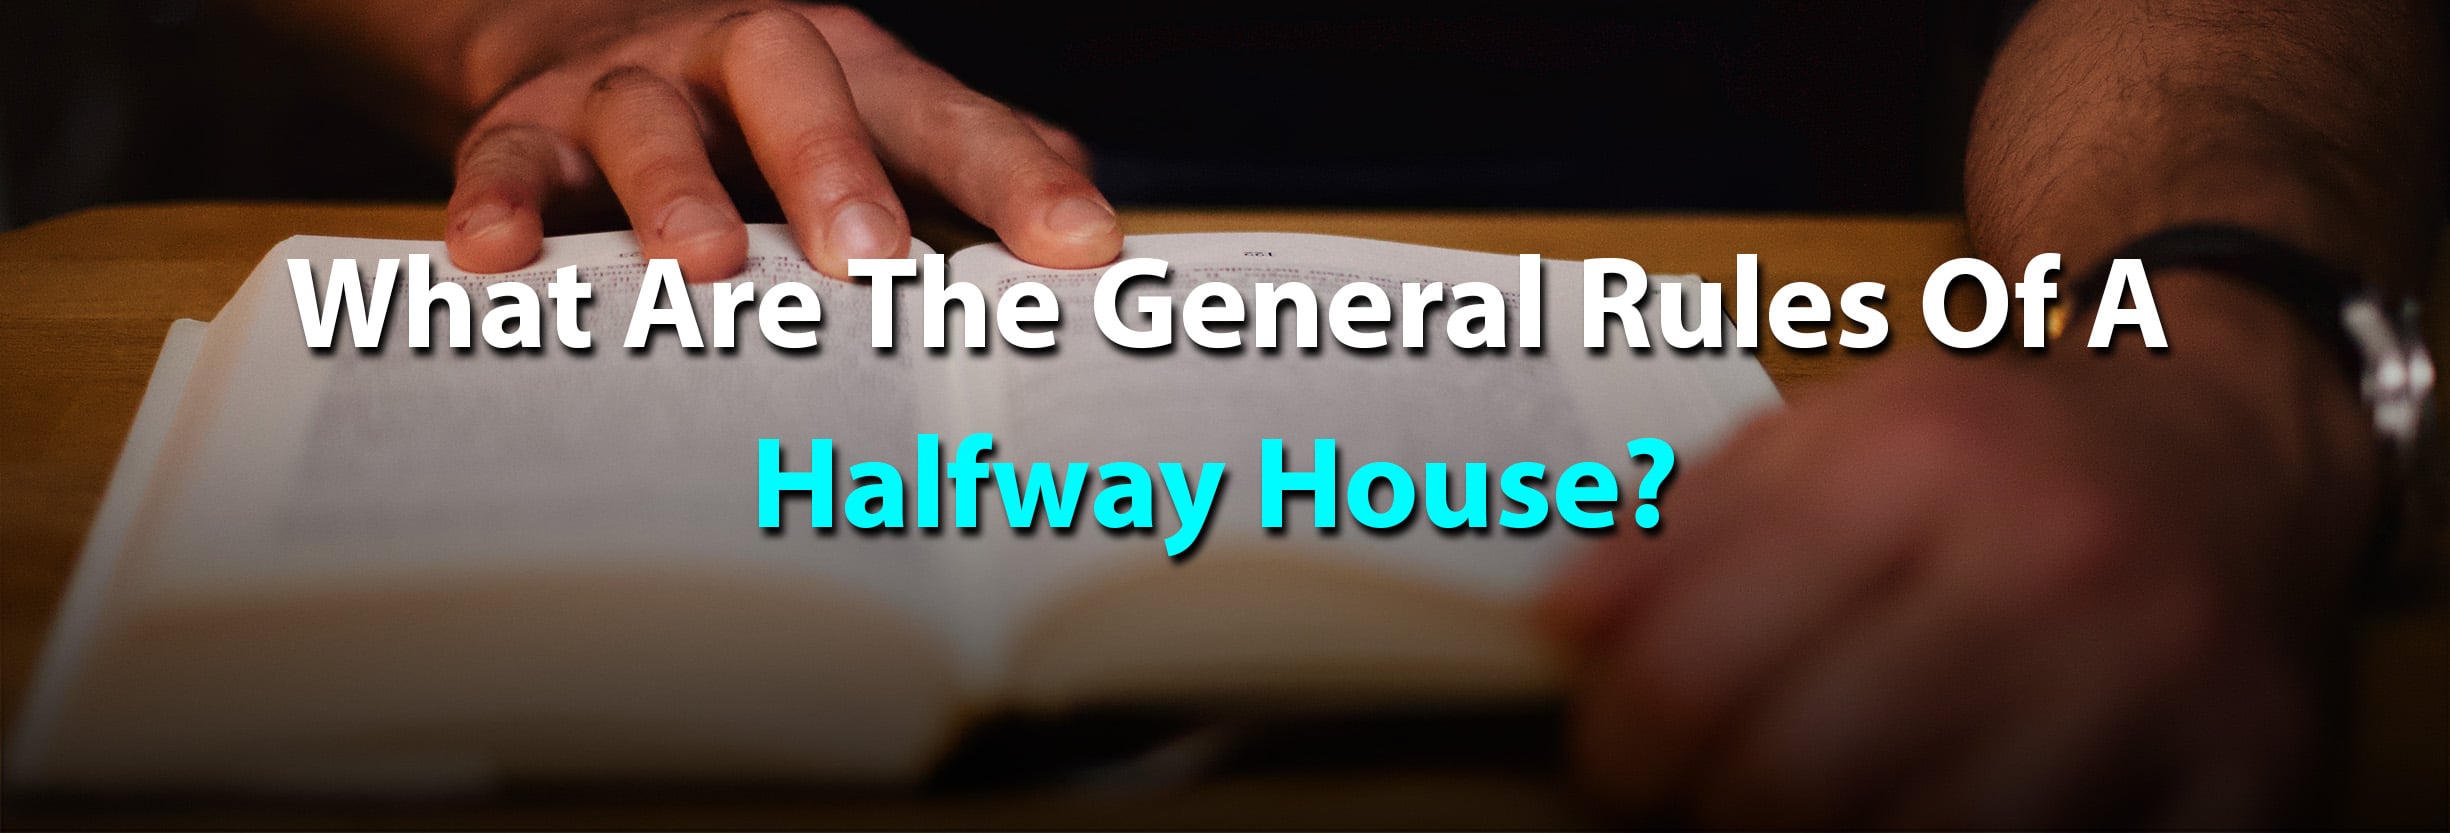 General Rules Of A Halfway House